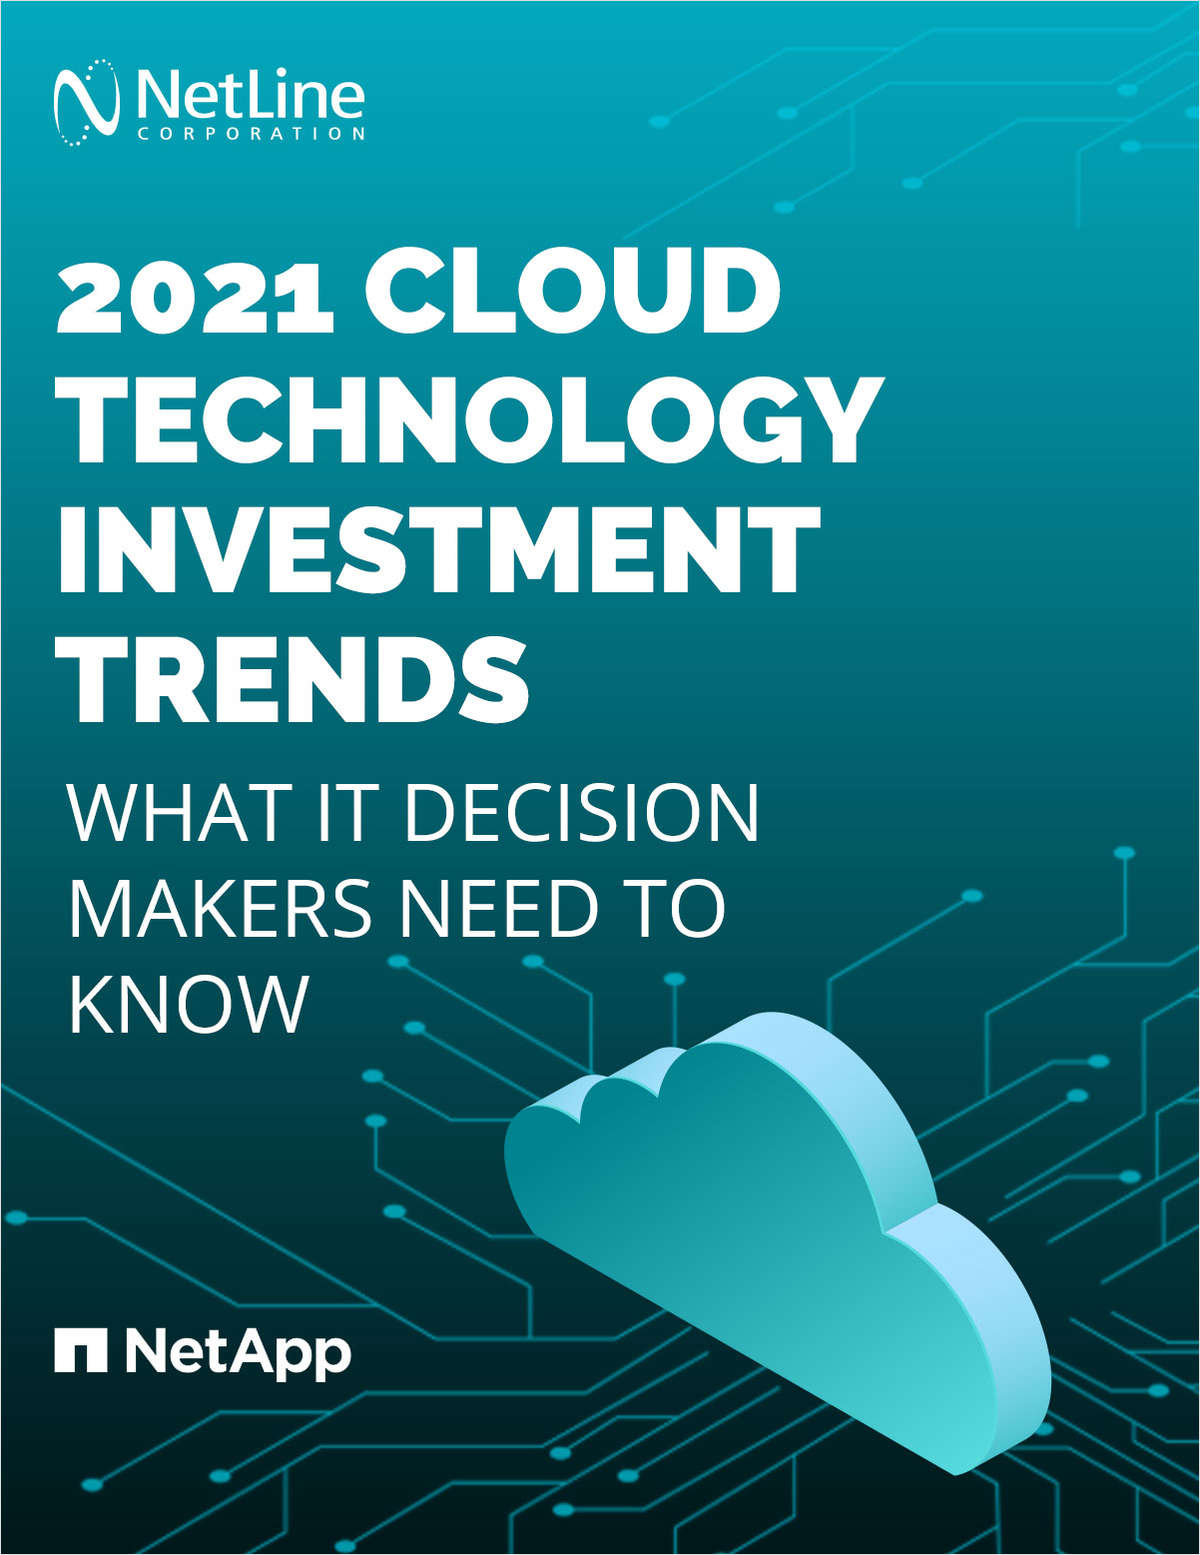 2021 Cloud Technology Investment Trends: What IT Decision Makers Need to Know